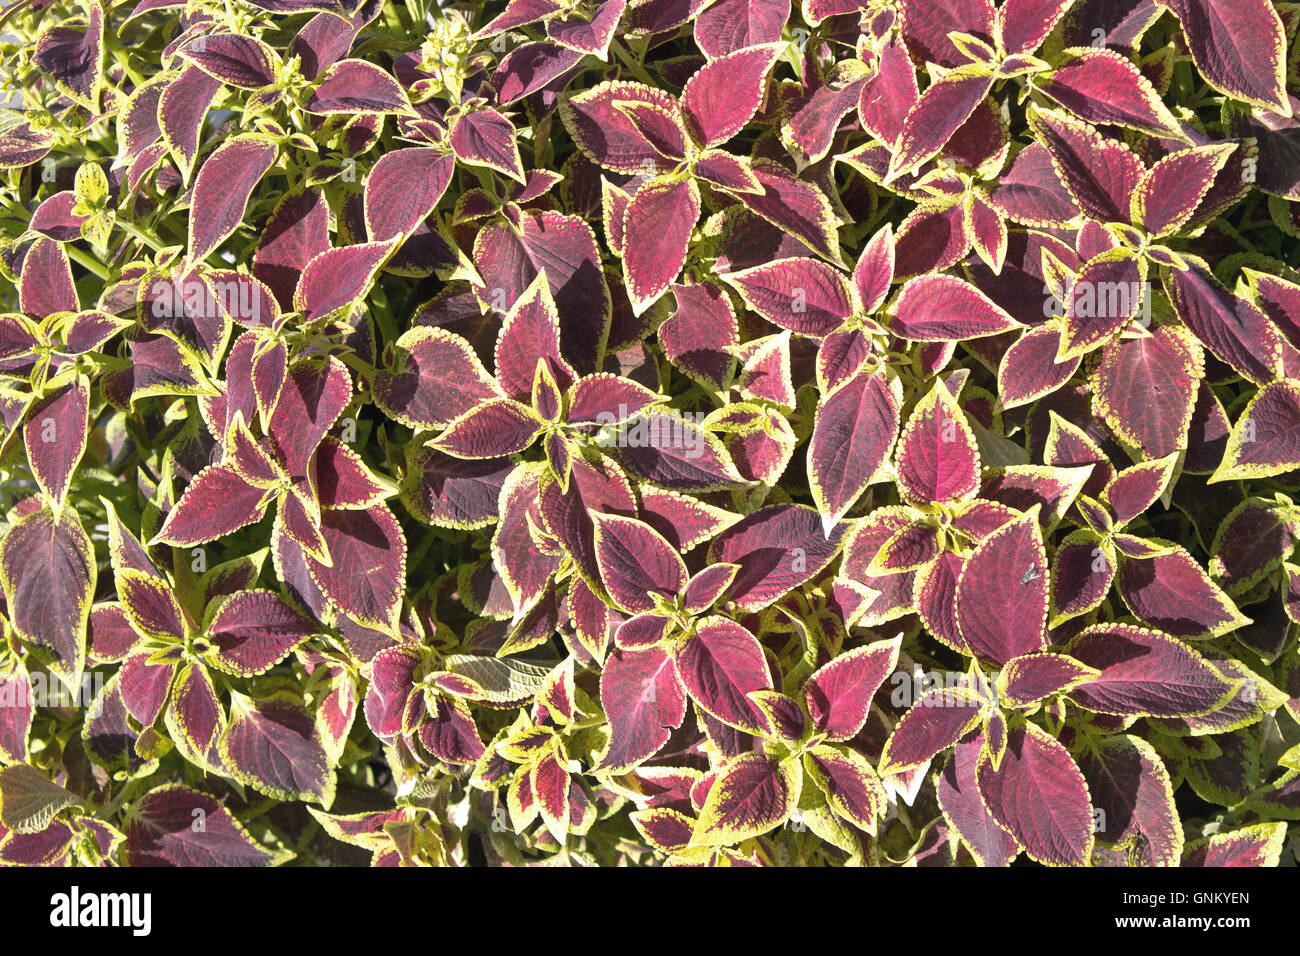 Floral of Coleus (Painted Nettle) plant as background Stock Photo